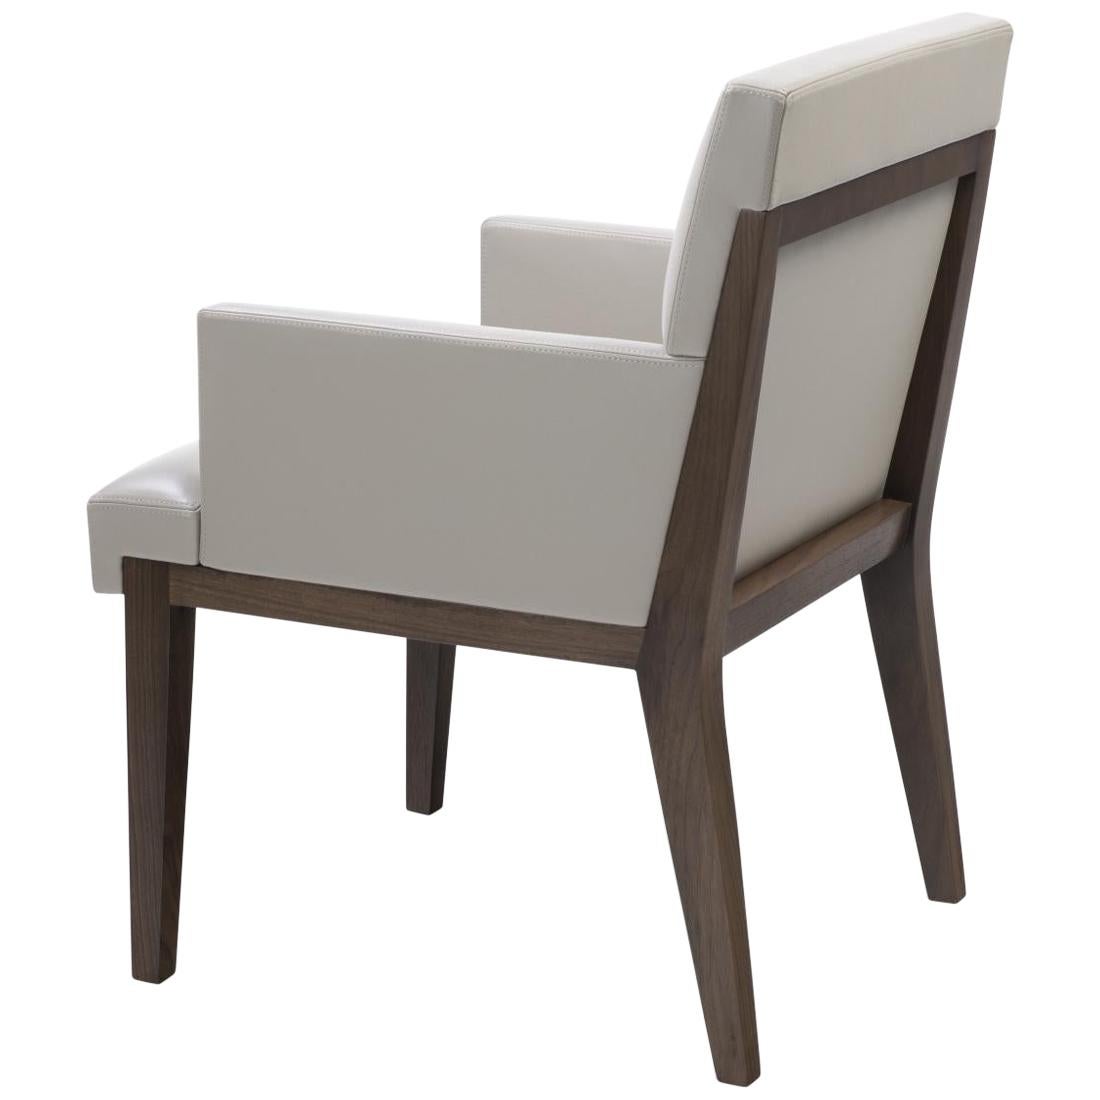 HOLLY HUNT Hampton Dining Arm Chair in Walnut Dusk Frame & Leather Seat